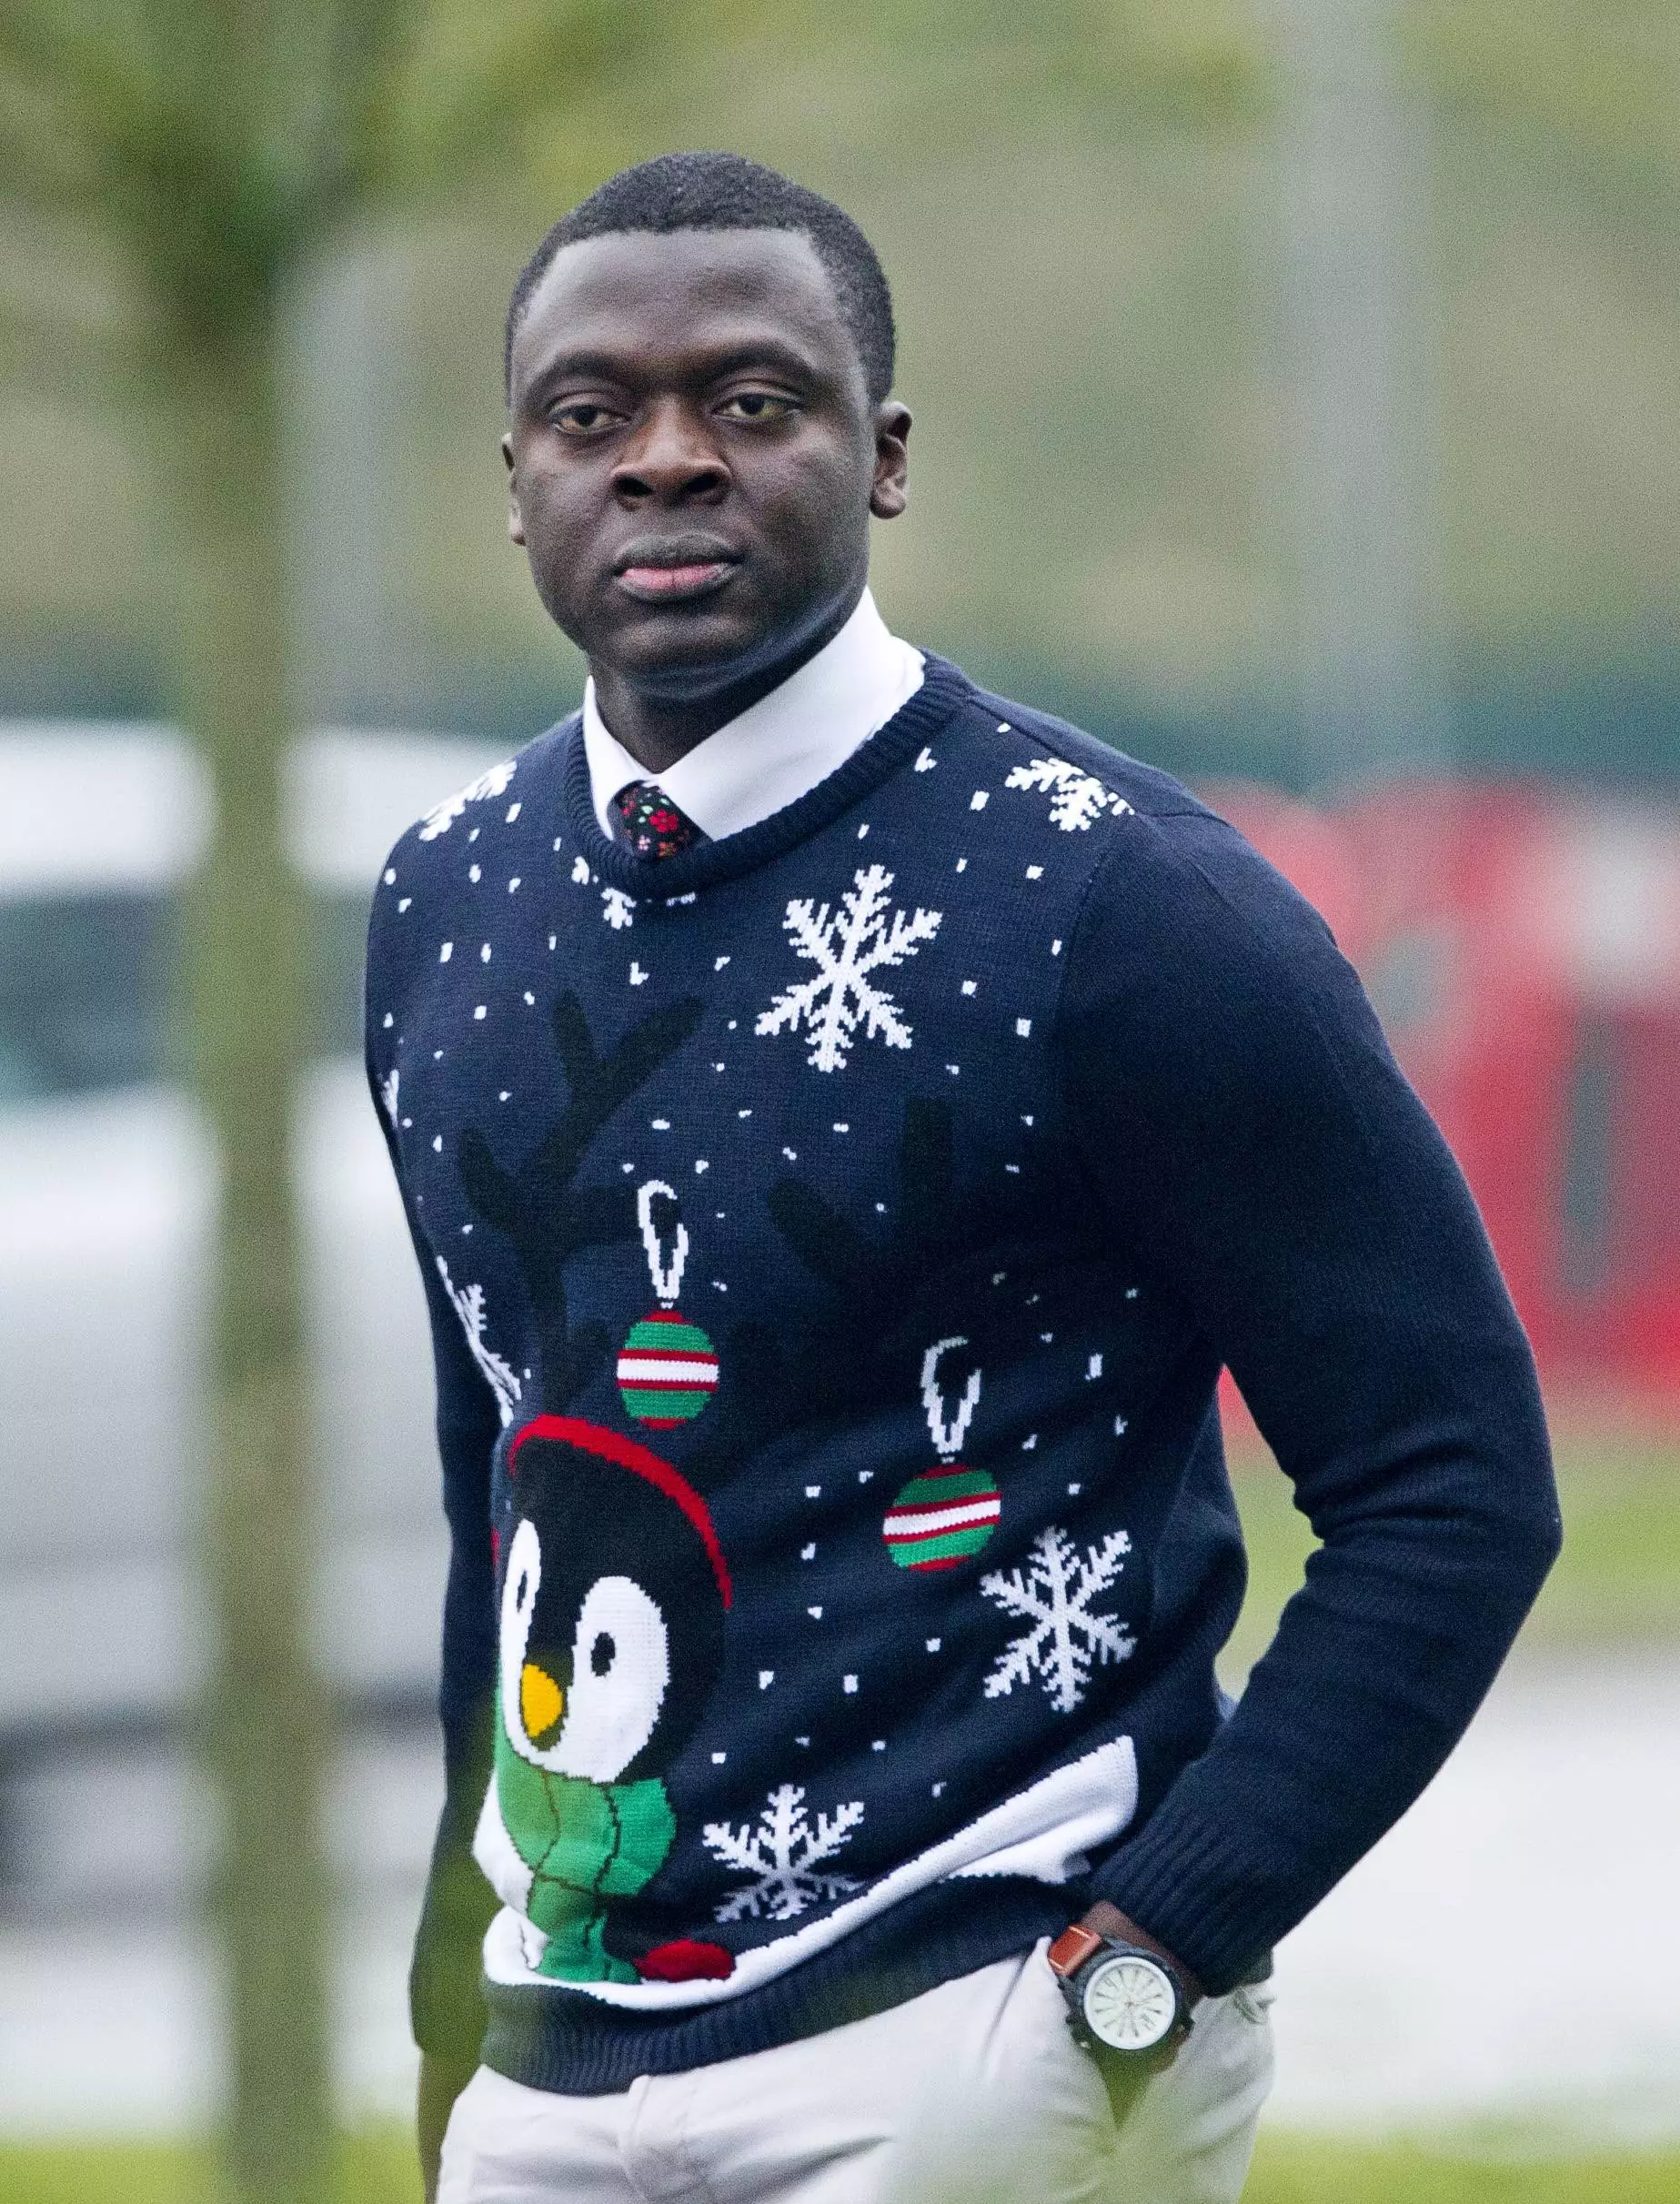 Michael Asiamah says the Army 'failed to protect' him from the cold weather in the UK.